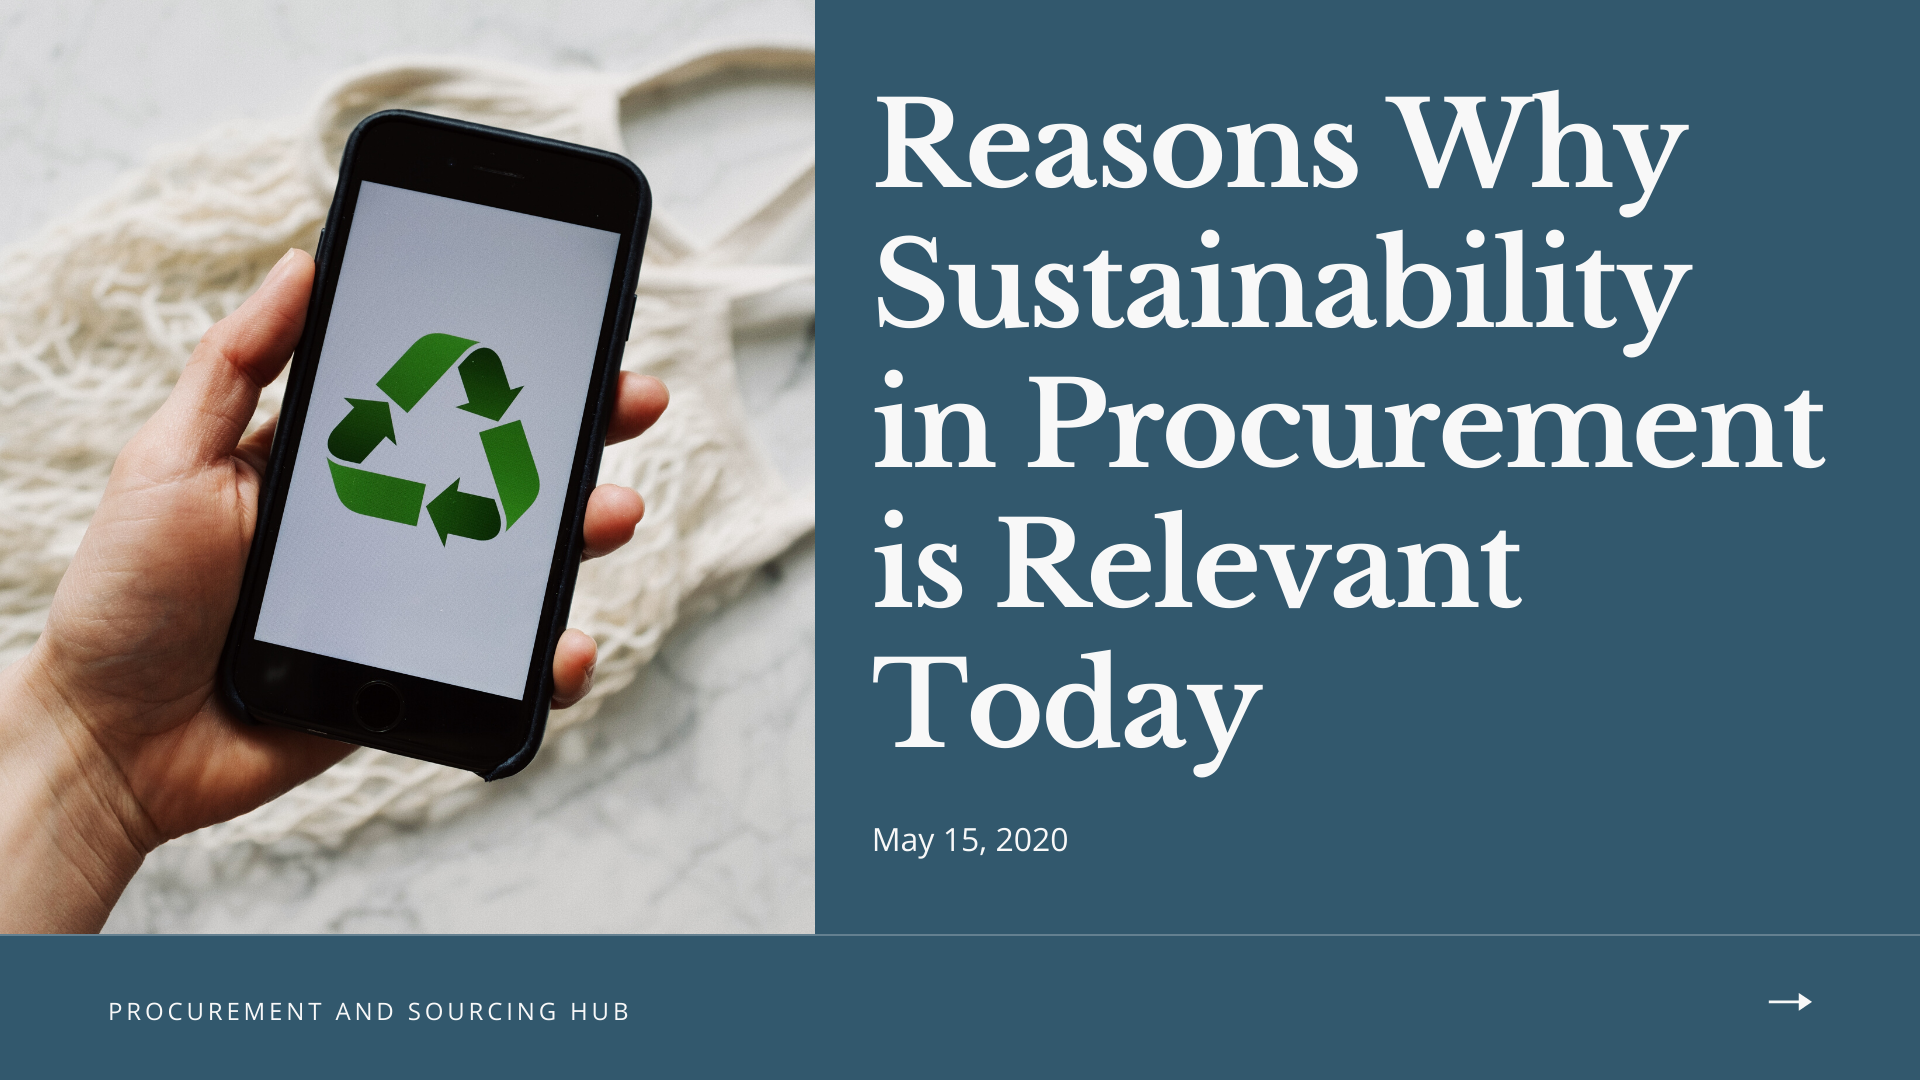 Reasons Why Sustainability in Procurement is Relevant Today